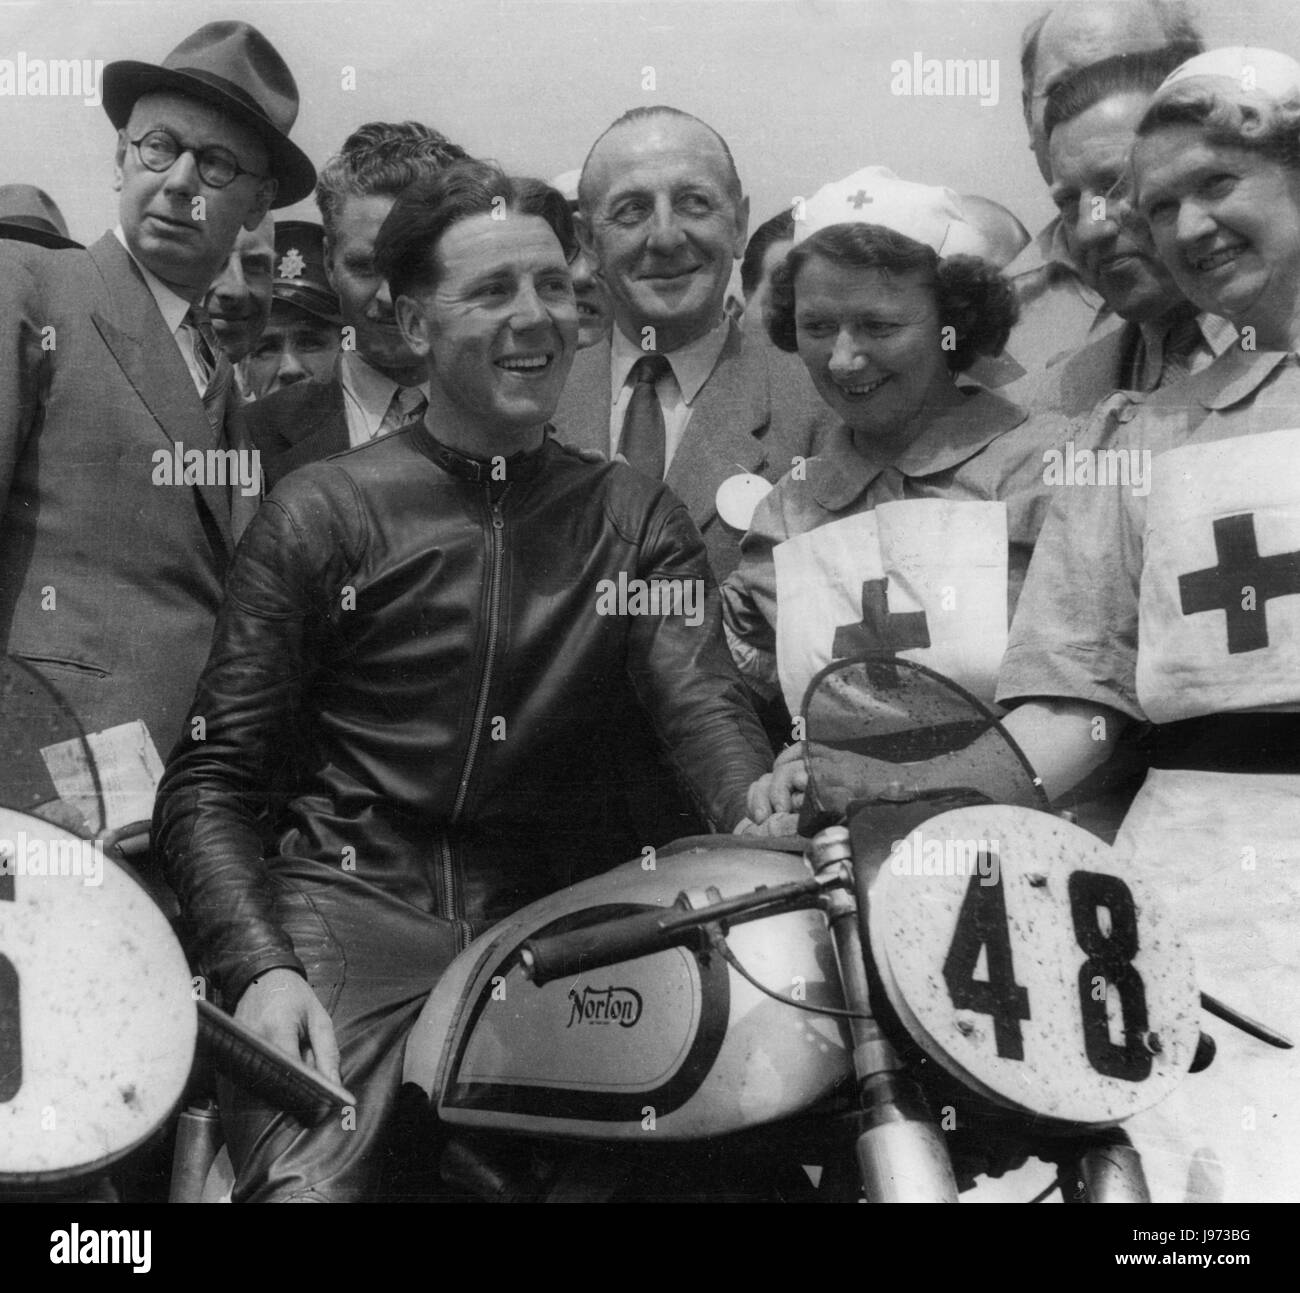 Geoff Duke astride his Norton motorcycle after winning race Stock Photo